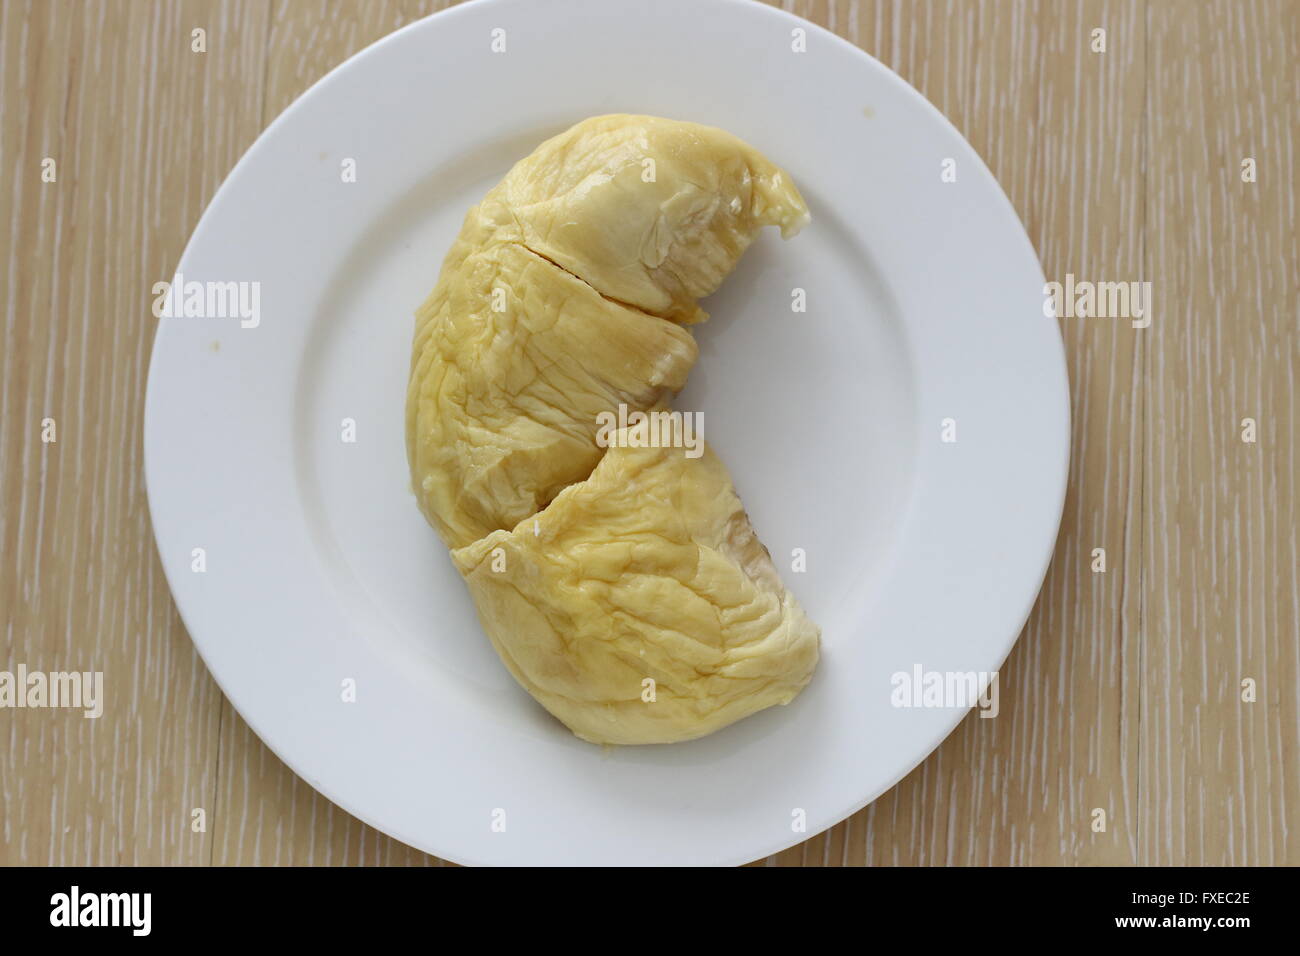 Durian flesh on white plate. Regarded by many people in southeast Asia as the 'king of fruits'. Stock Photo